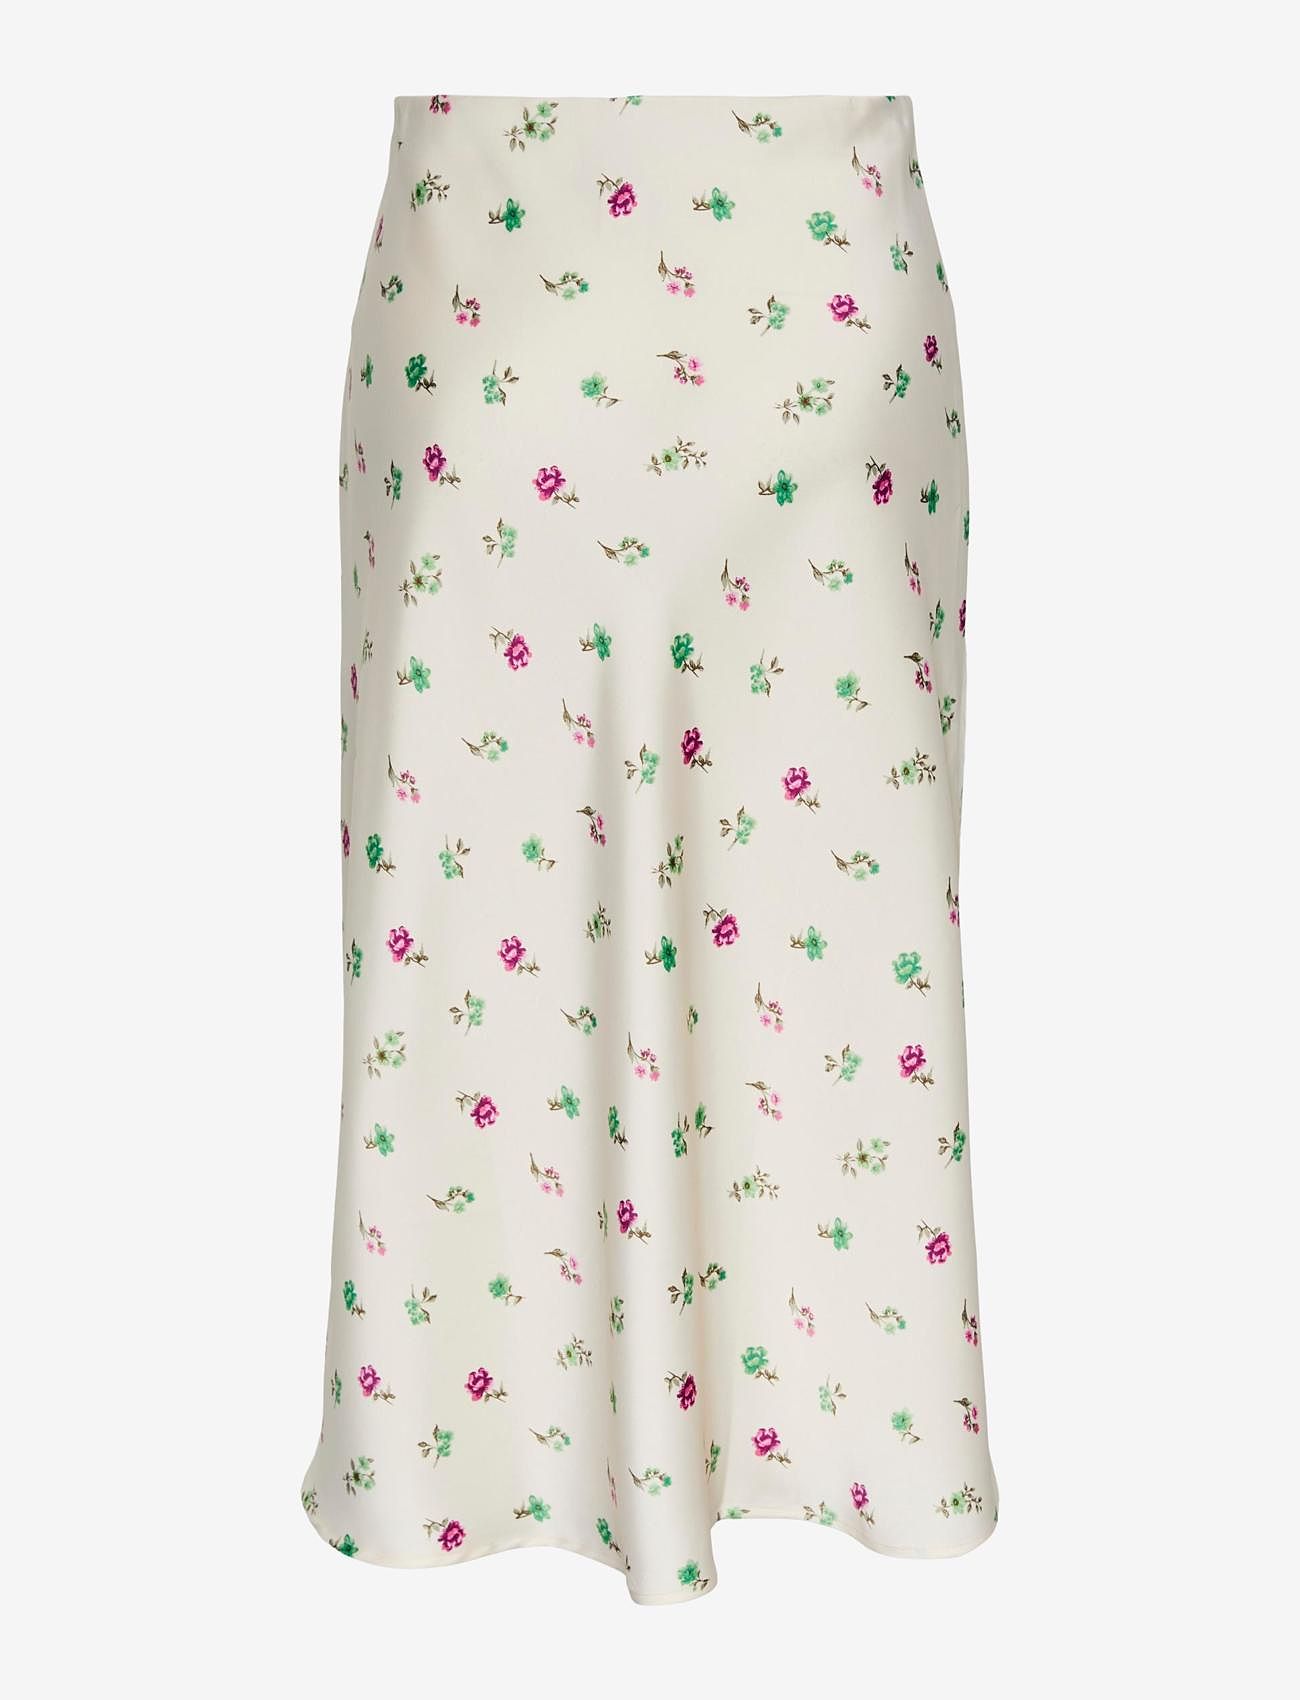 YAS - YASDOTTEA HW MIDI SKIRT S. - EX - party wear at outlet prices - birch - 1